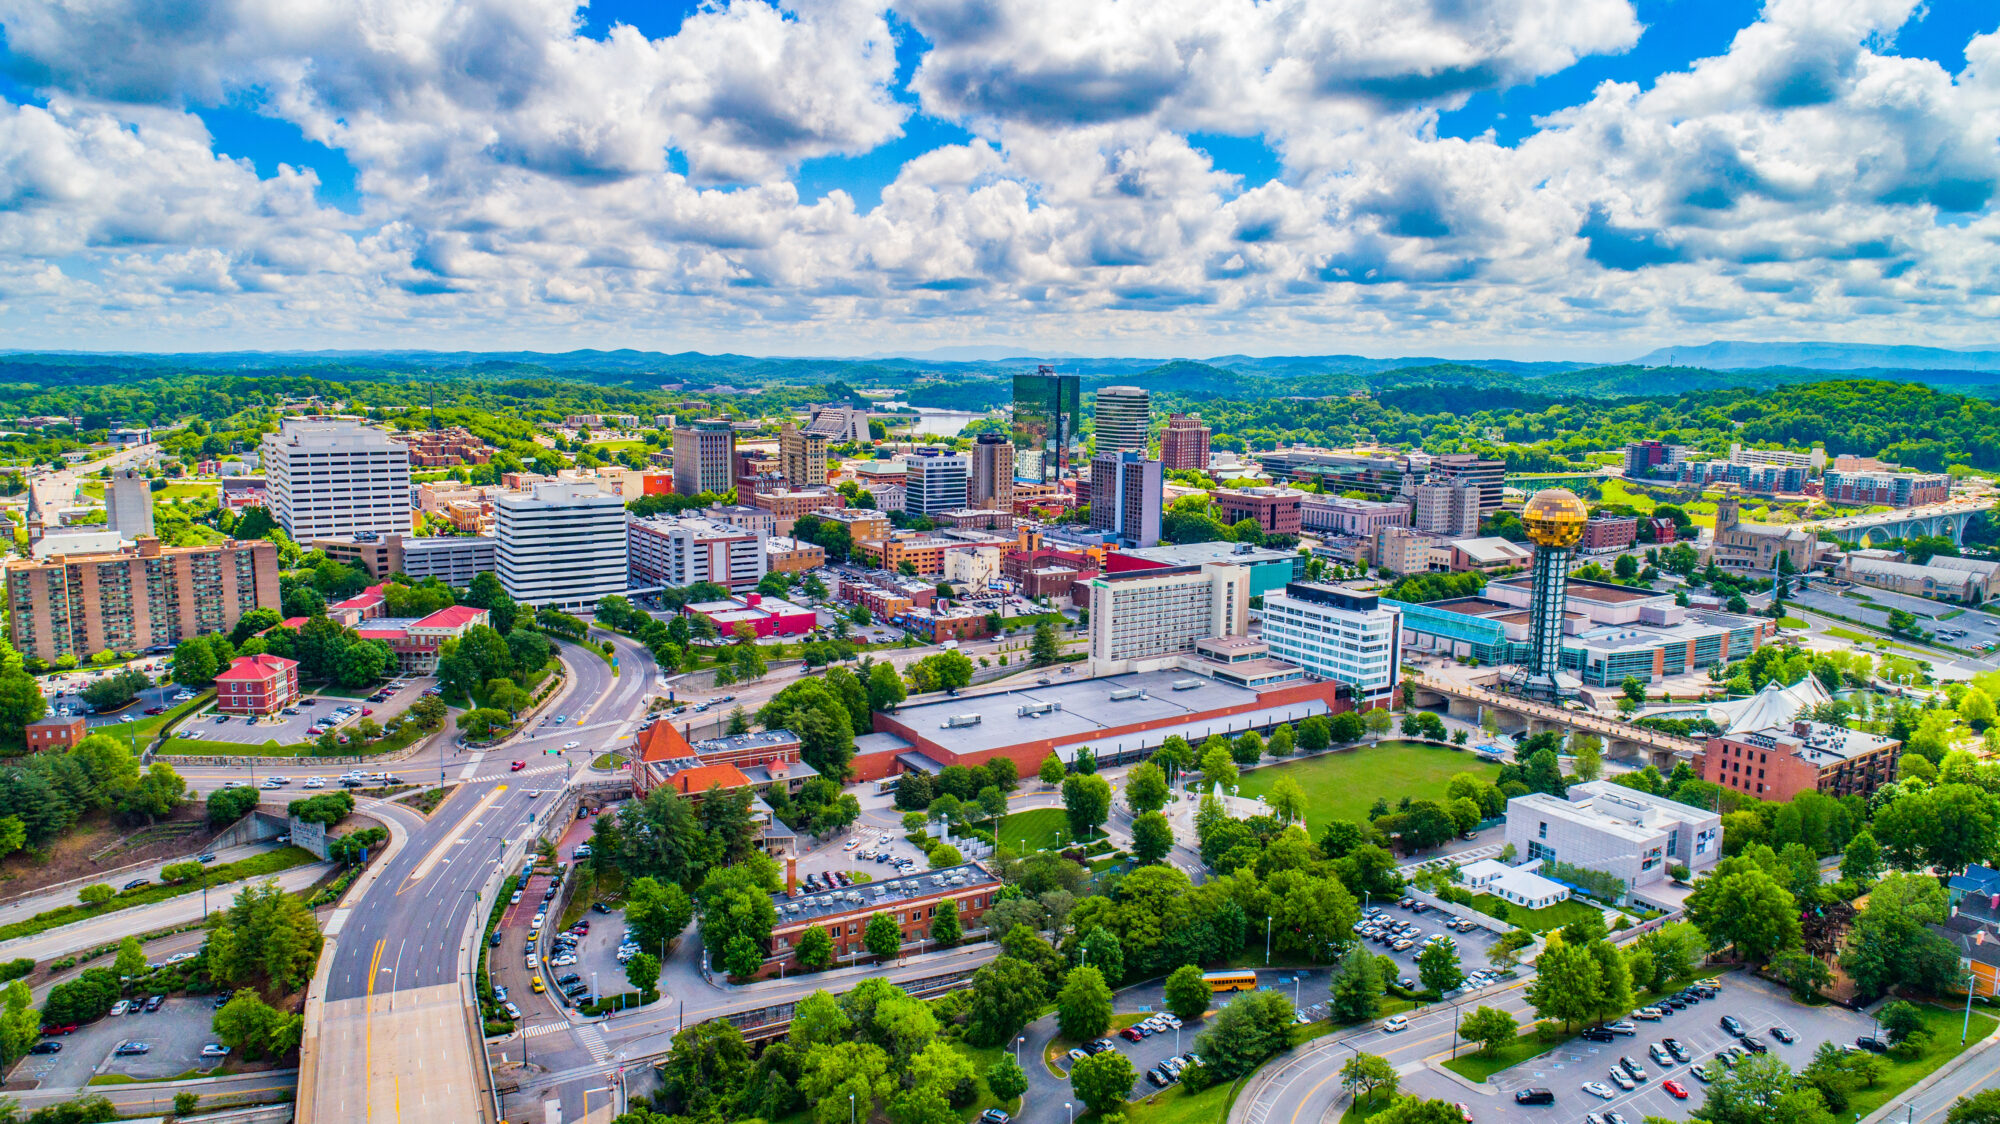 Downtown Knoxville, Tennessee, USA Skyline.